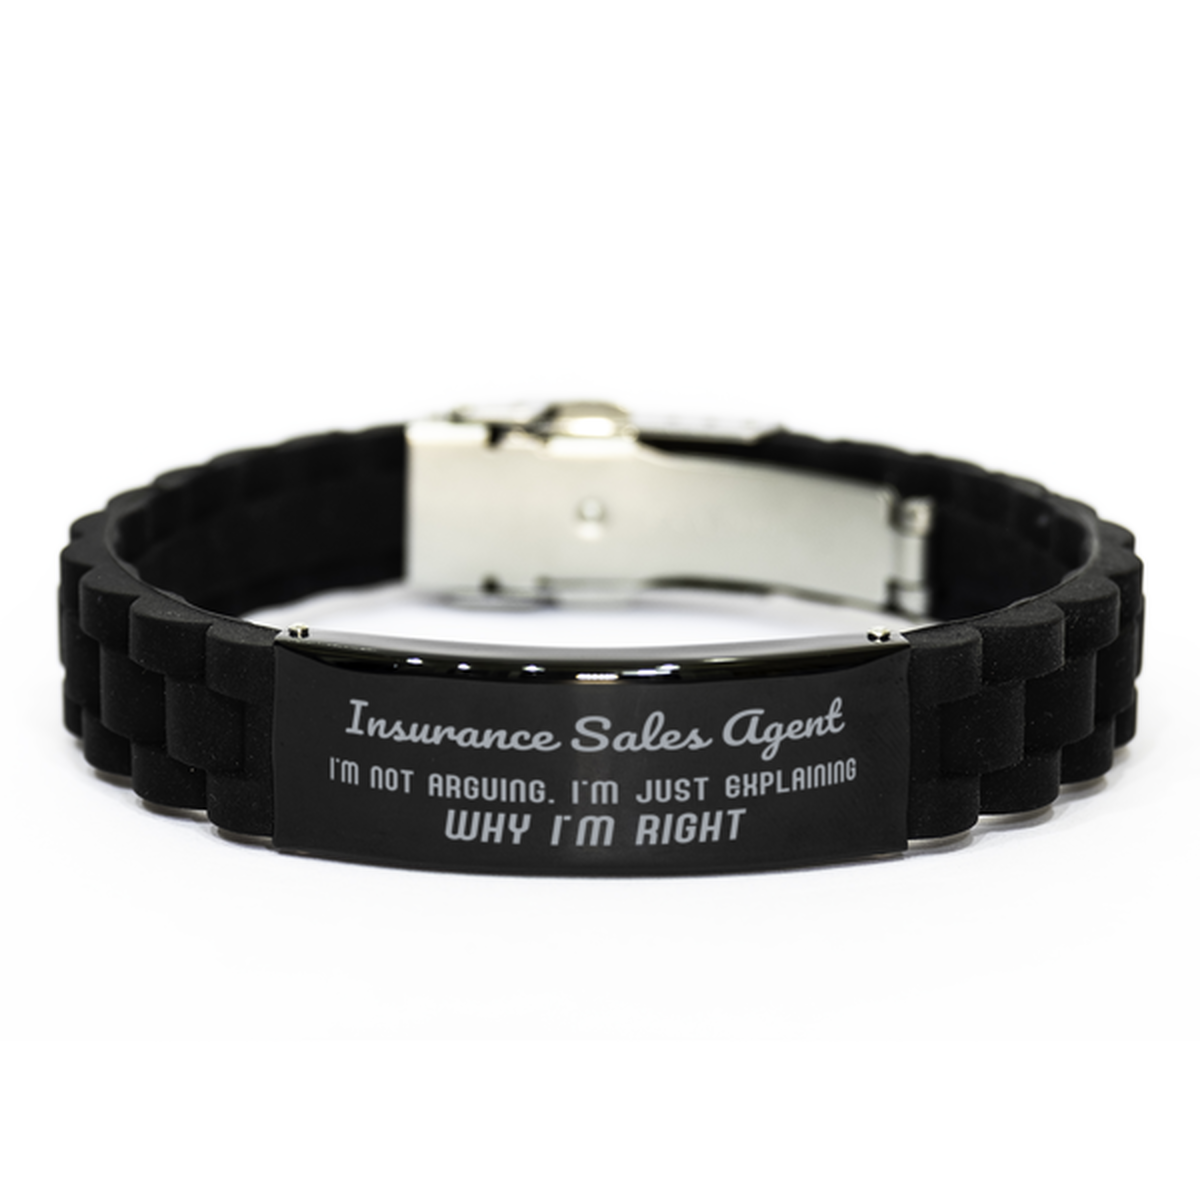 Insurance Sales Agent I'm not Arguing. I'm Just Explaining Why I'm RIGHT Black Glidelock Clasp Bracelet, Funny Saying Quote Insurance Sales Agent Gifts For Insurance Sales Agent Graduation Birthday Christmas Gifts for Men Women Coworker